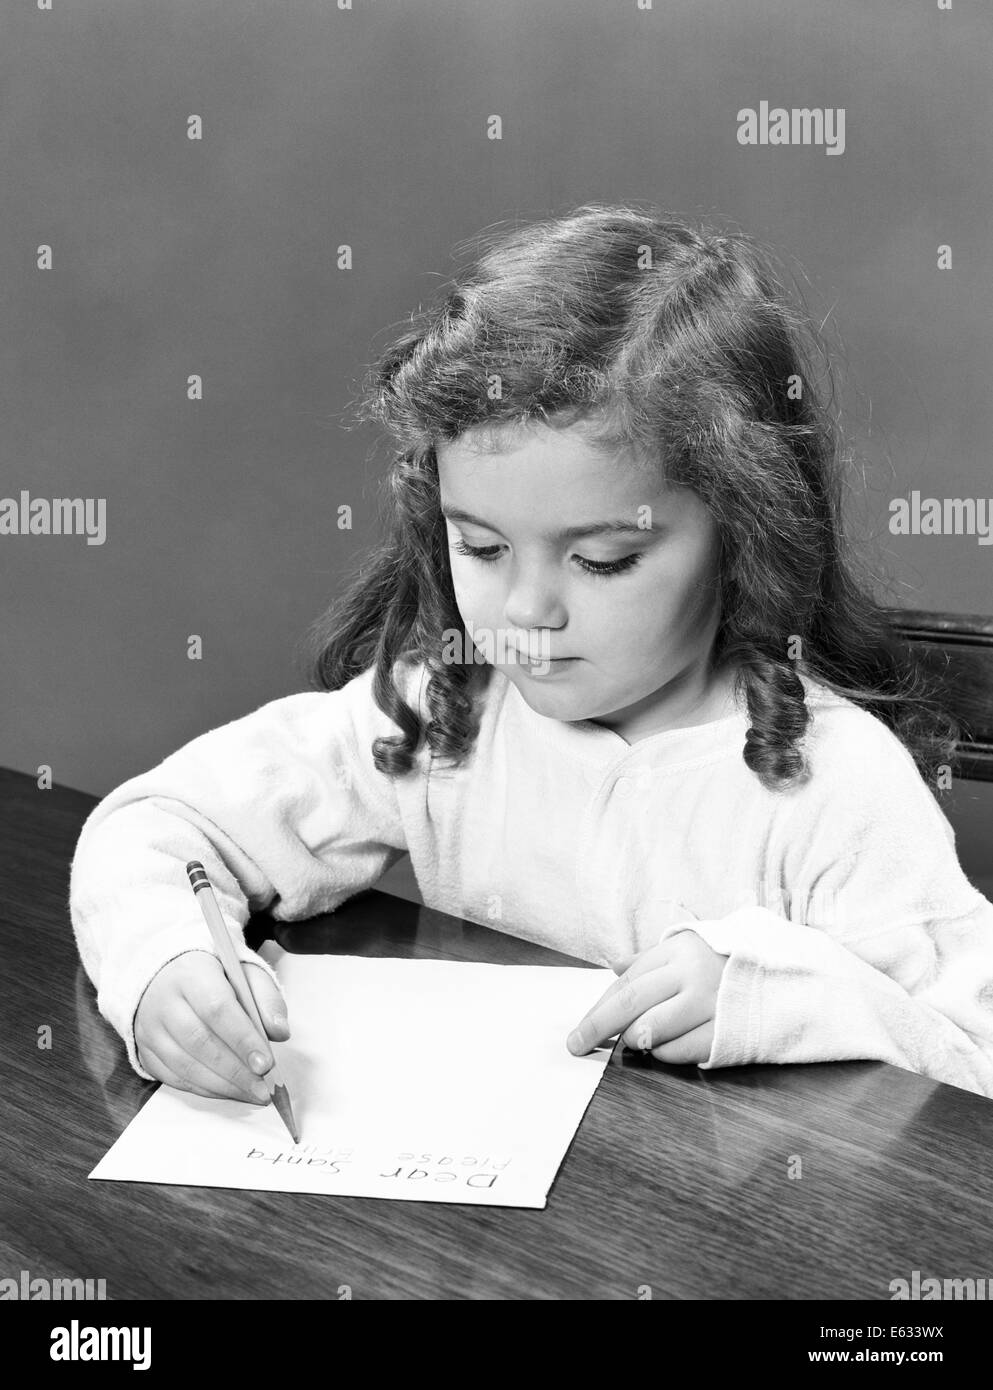 1940s LITTLE GIRL WITH CURLY HAIR WRITING LETTER WITH PENCIL AND PAPER Stock Photo